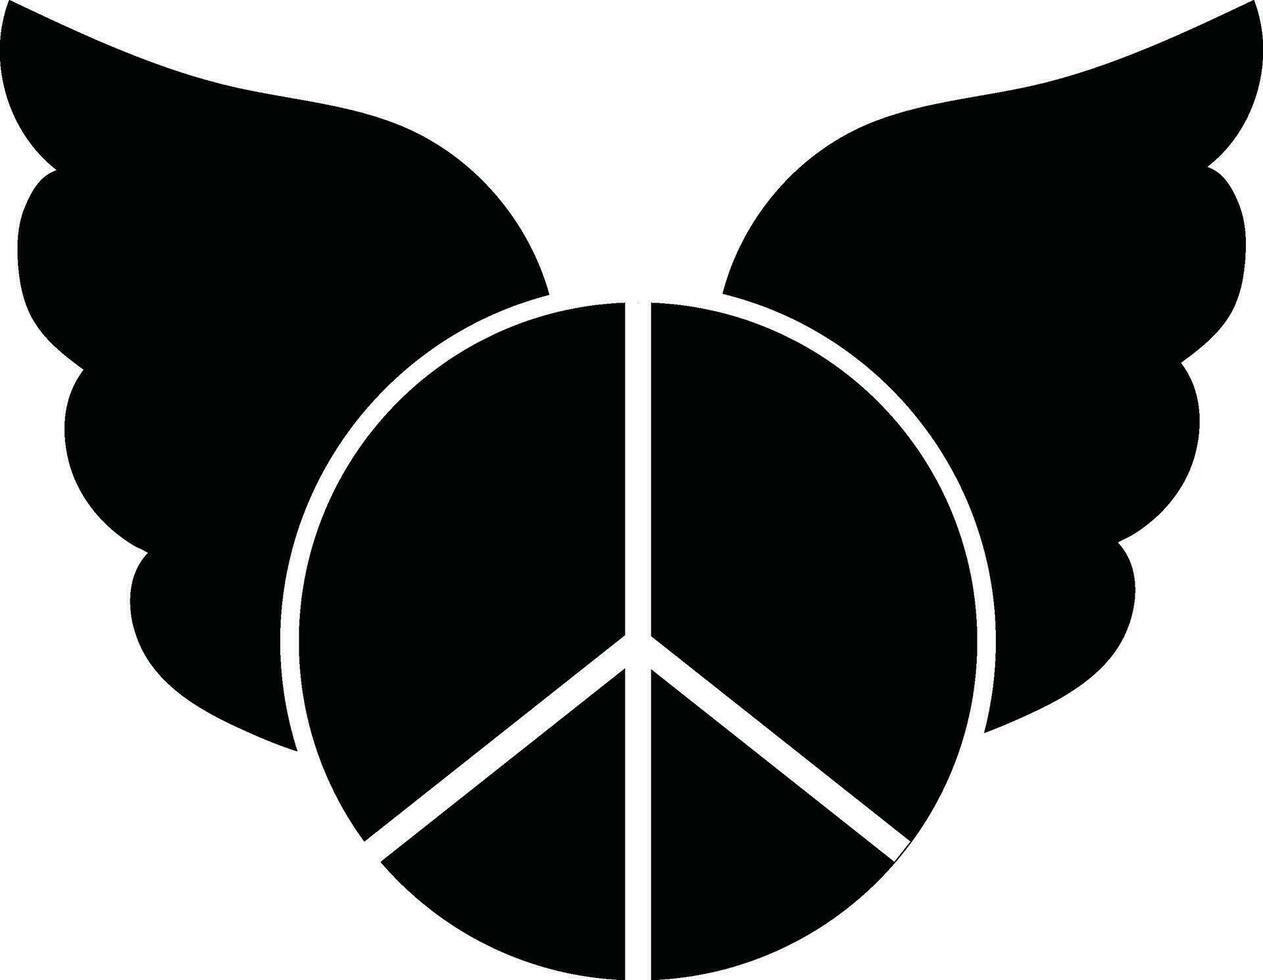 Sign of peace with set of wing. vector